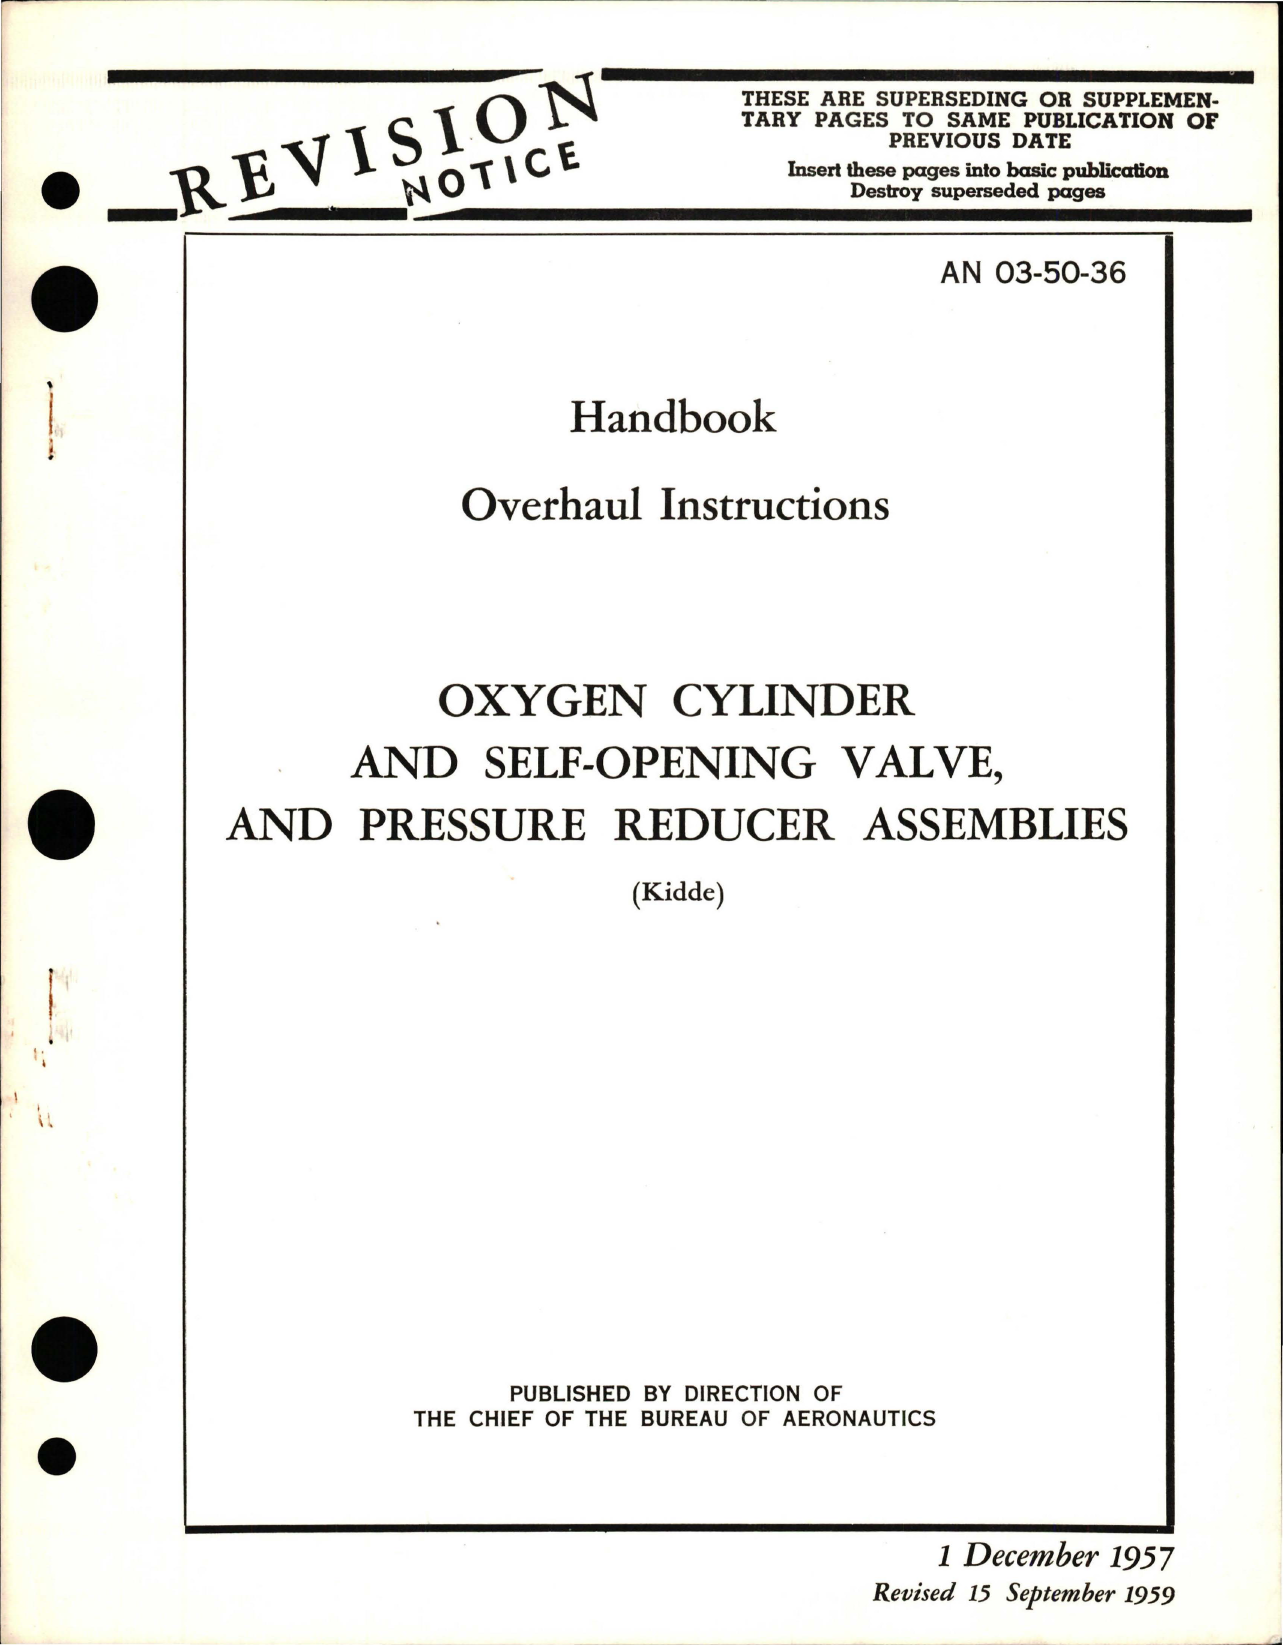 Sample page 1 from AirCorps Library document: Overhaul Instructions for Oxygen Cylinder, Self-Opening Valve, and Pressure Reducer Assembly